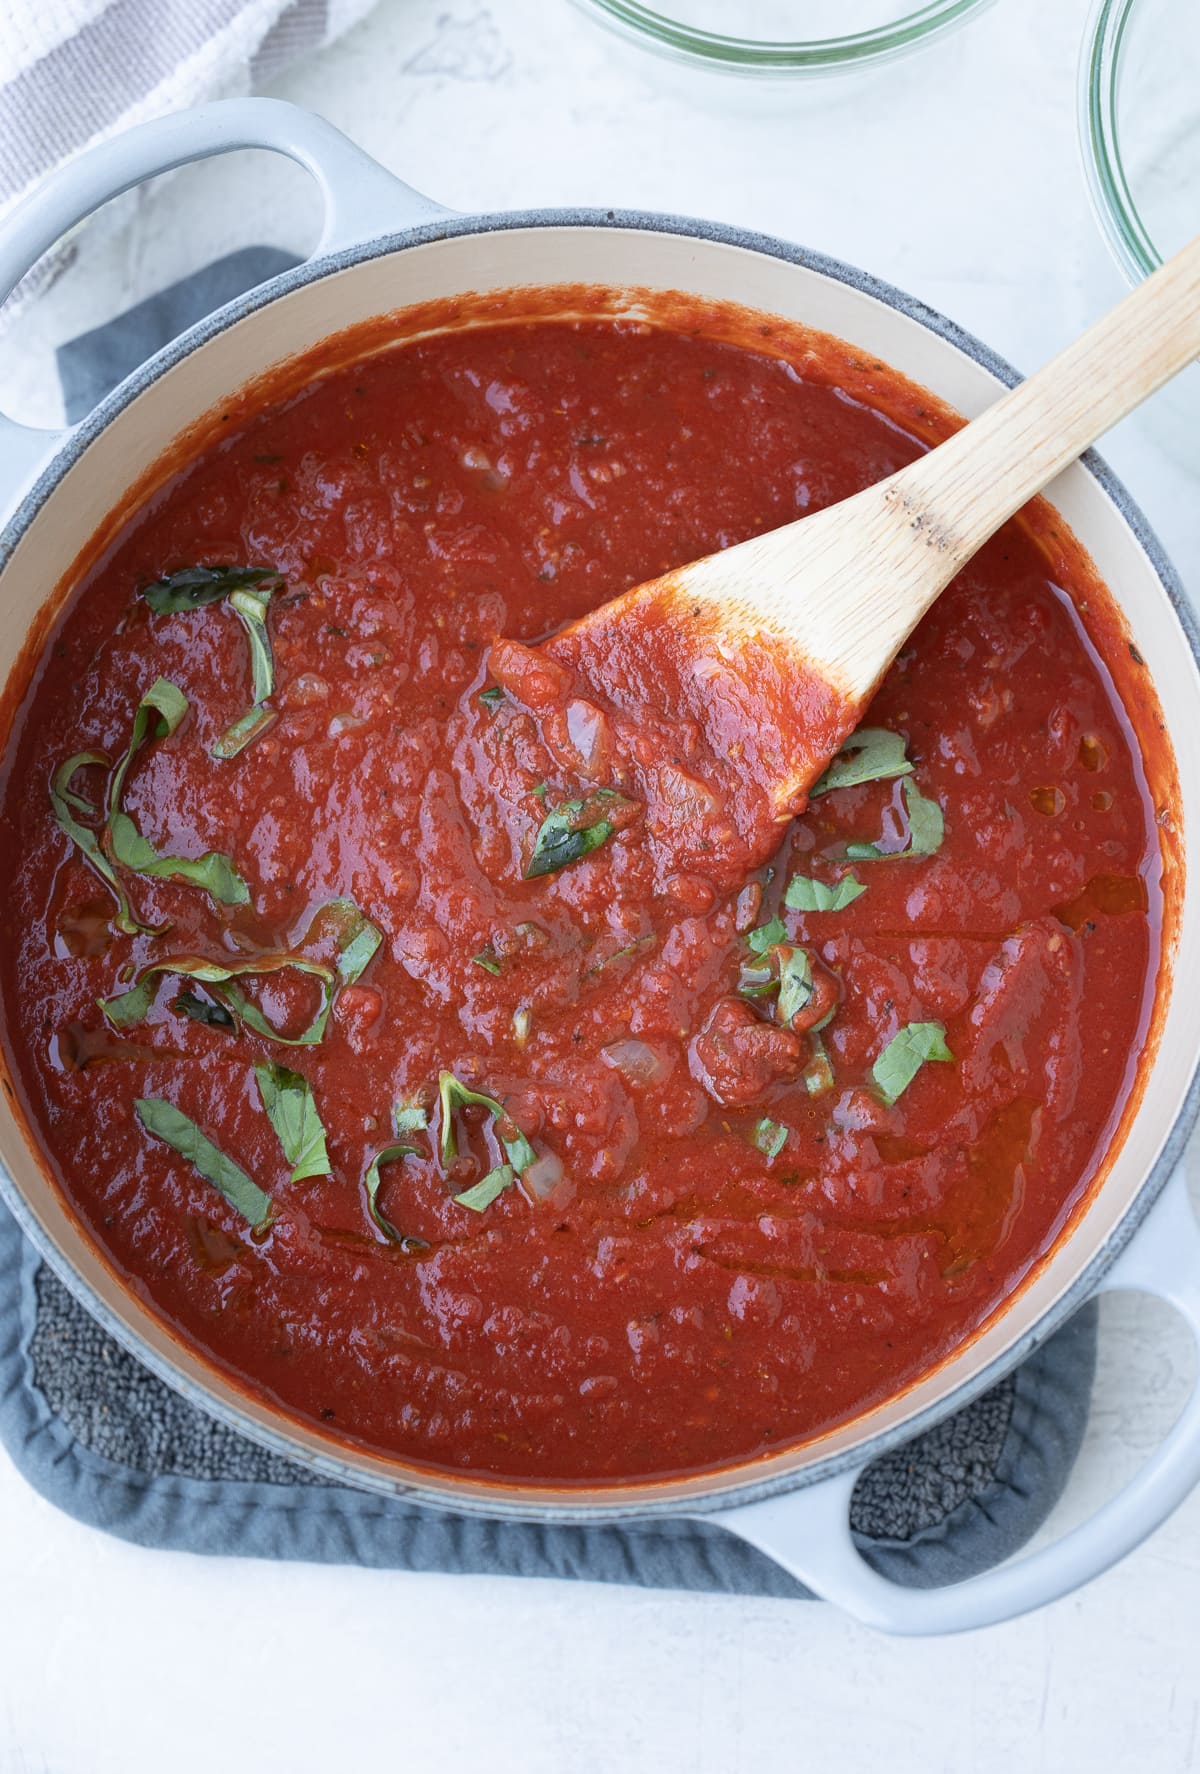 Finished homemade tomato marinara in a pot with basil leaves.